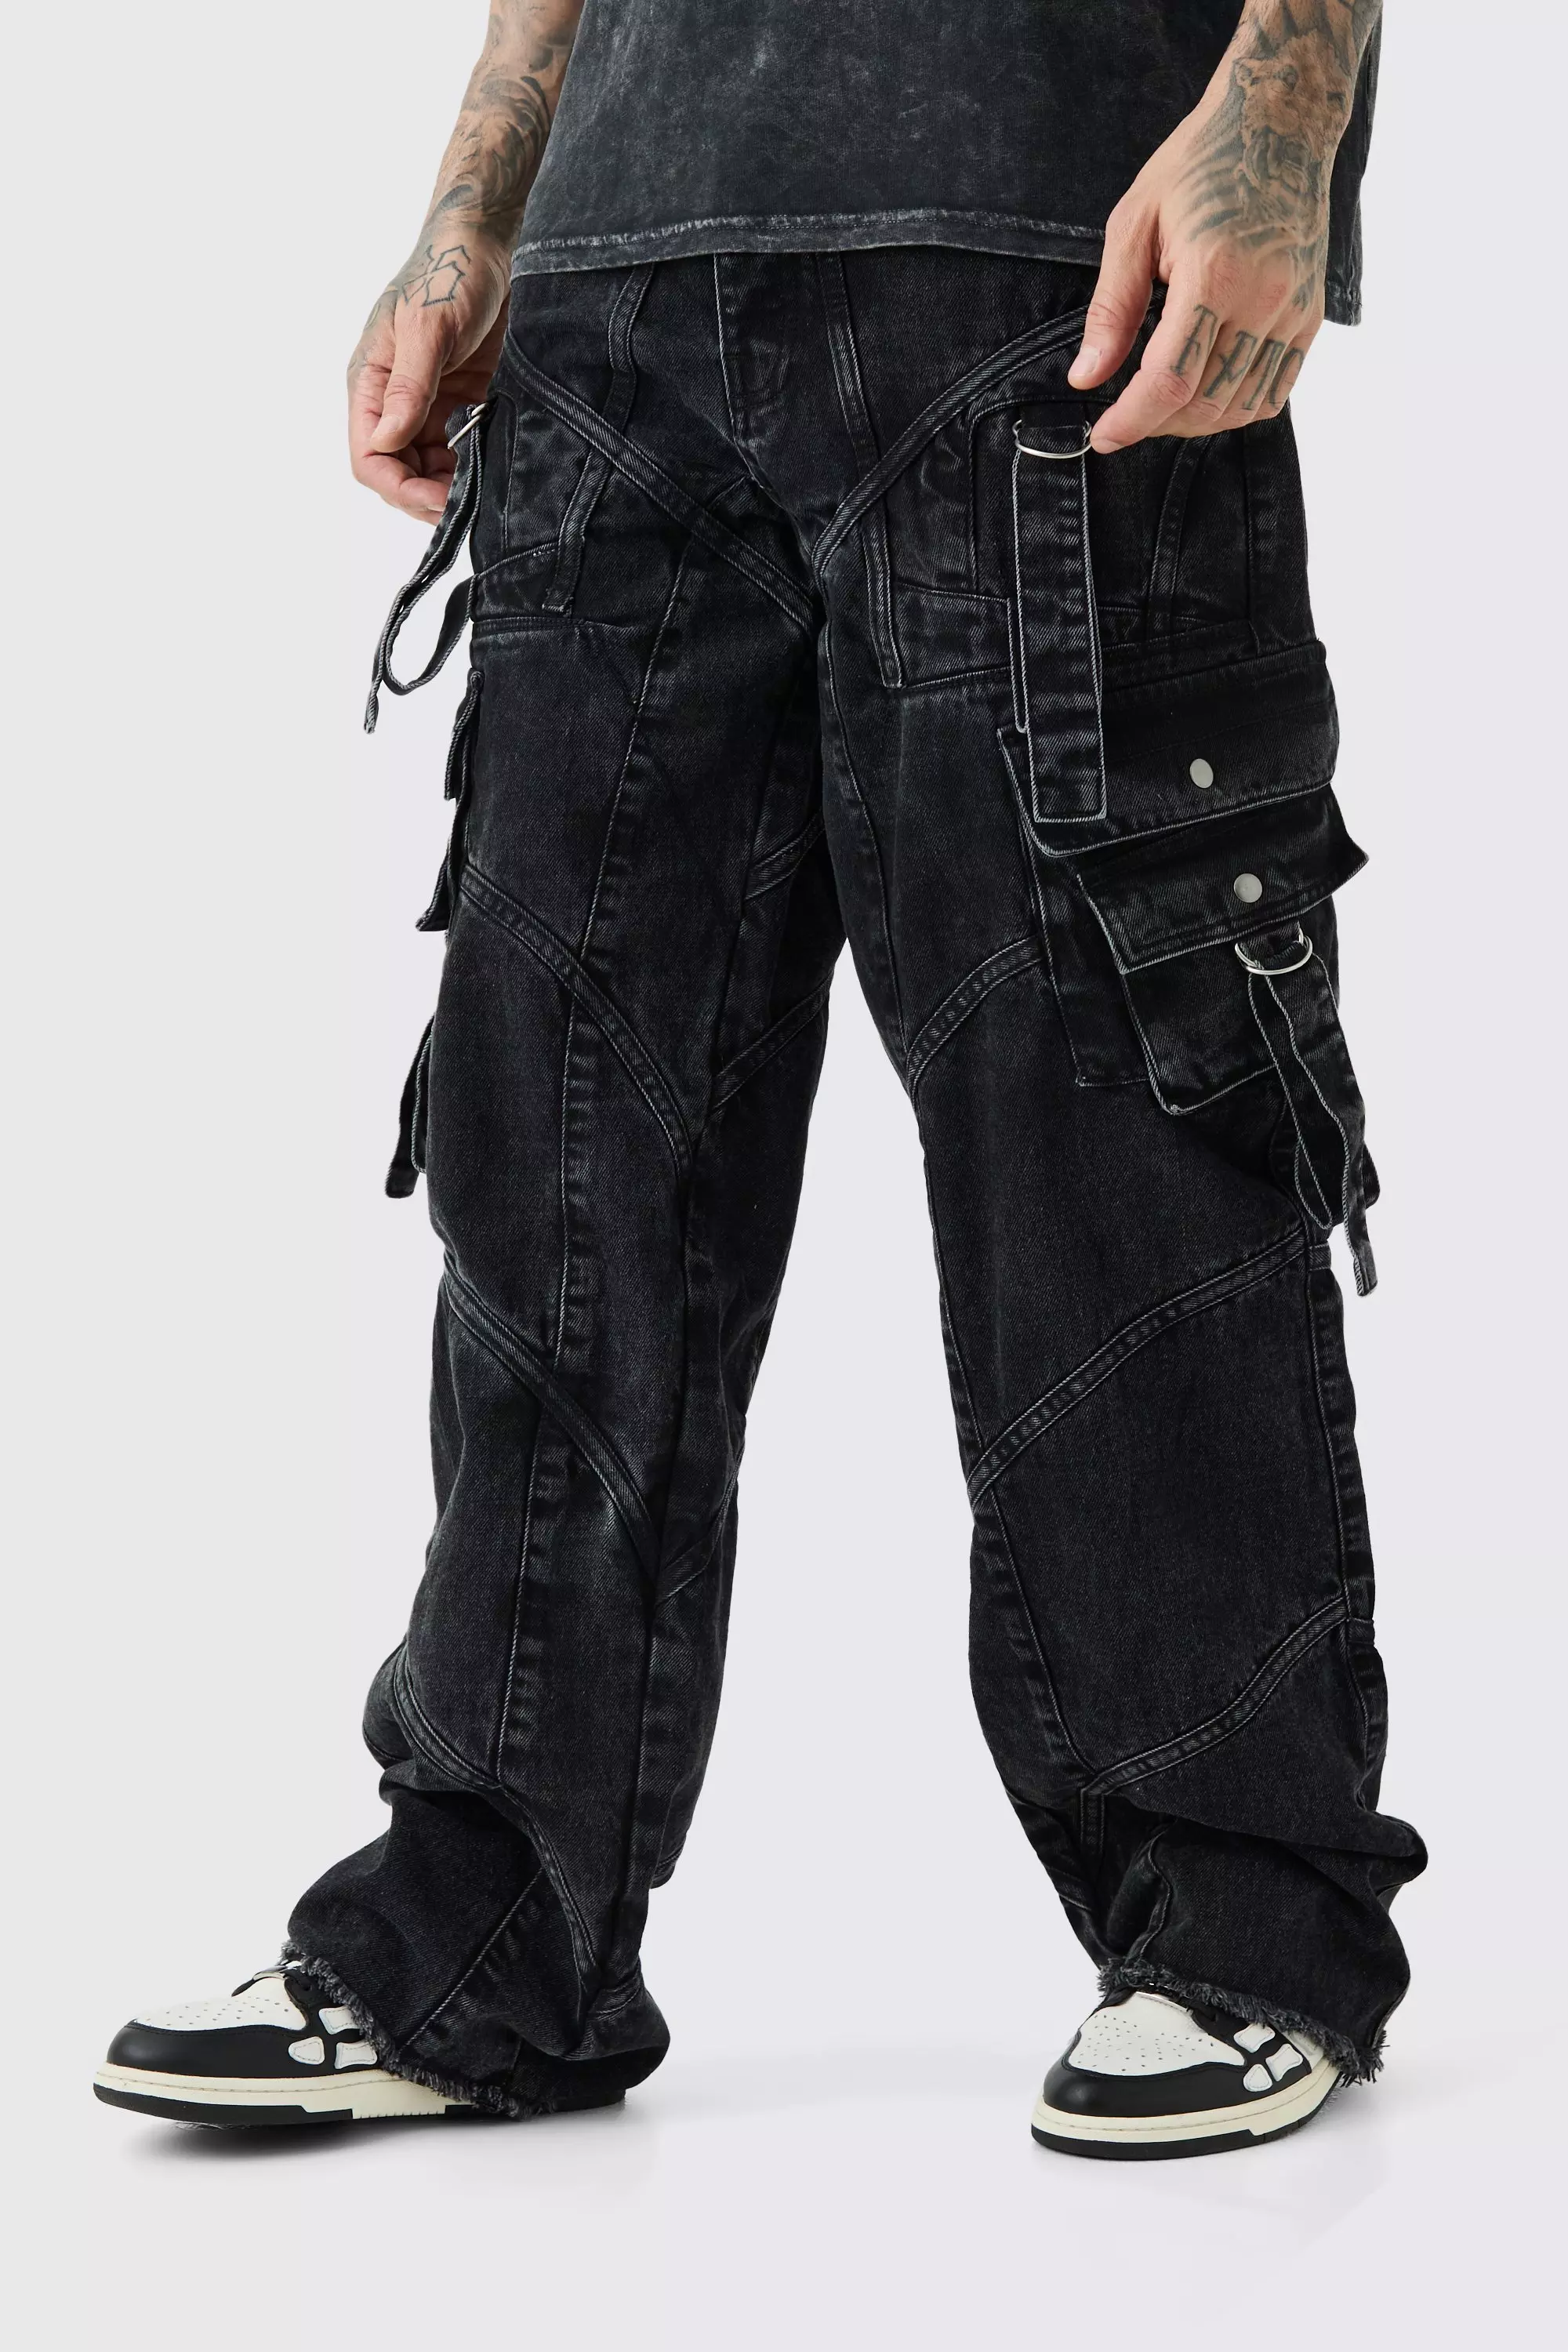 Ash Grey Tall Baggy Rigid Strap And Buckle Detail Jeans